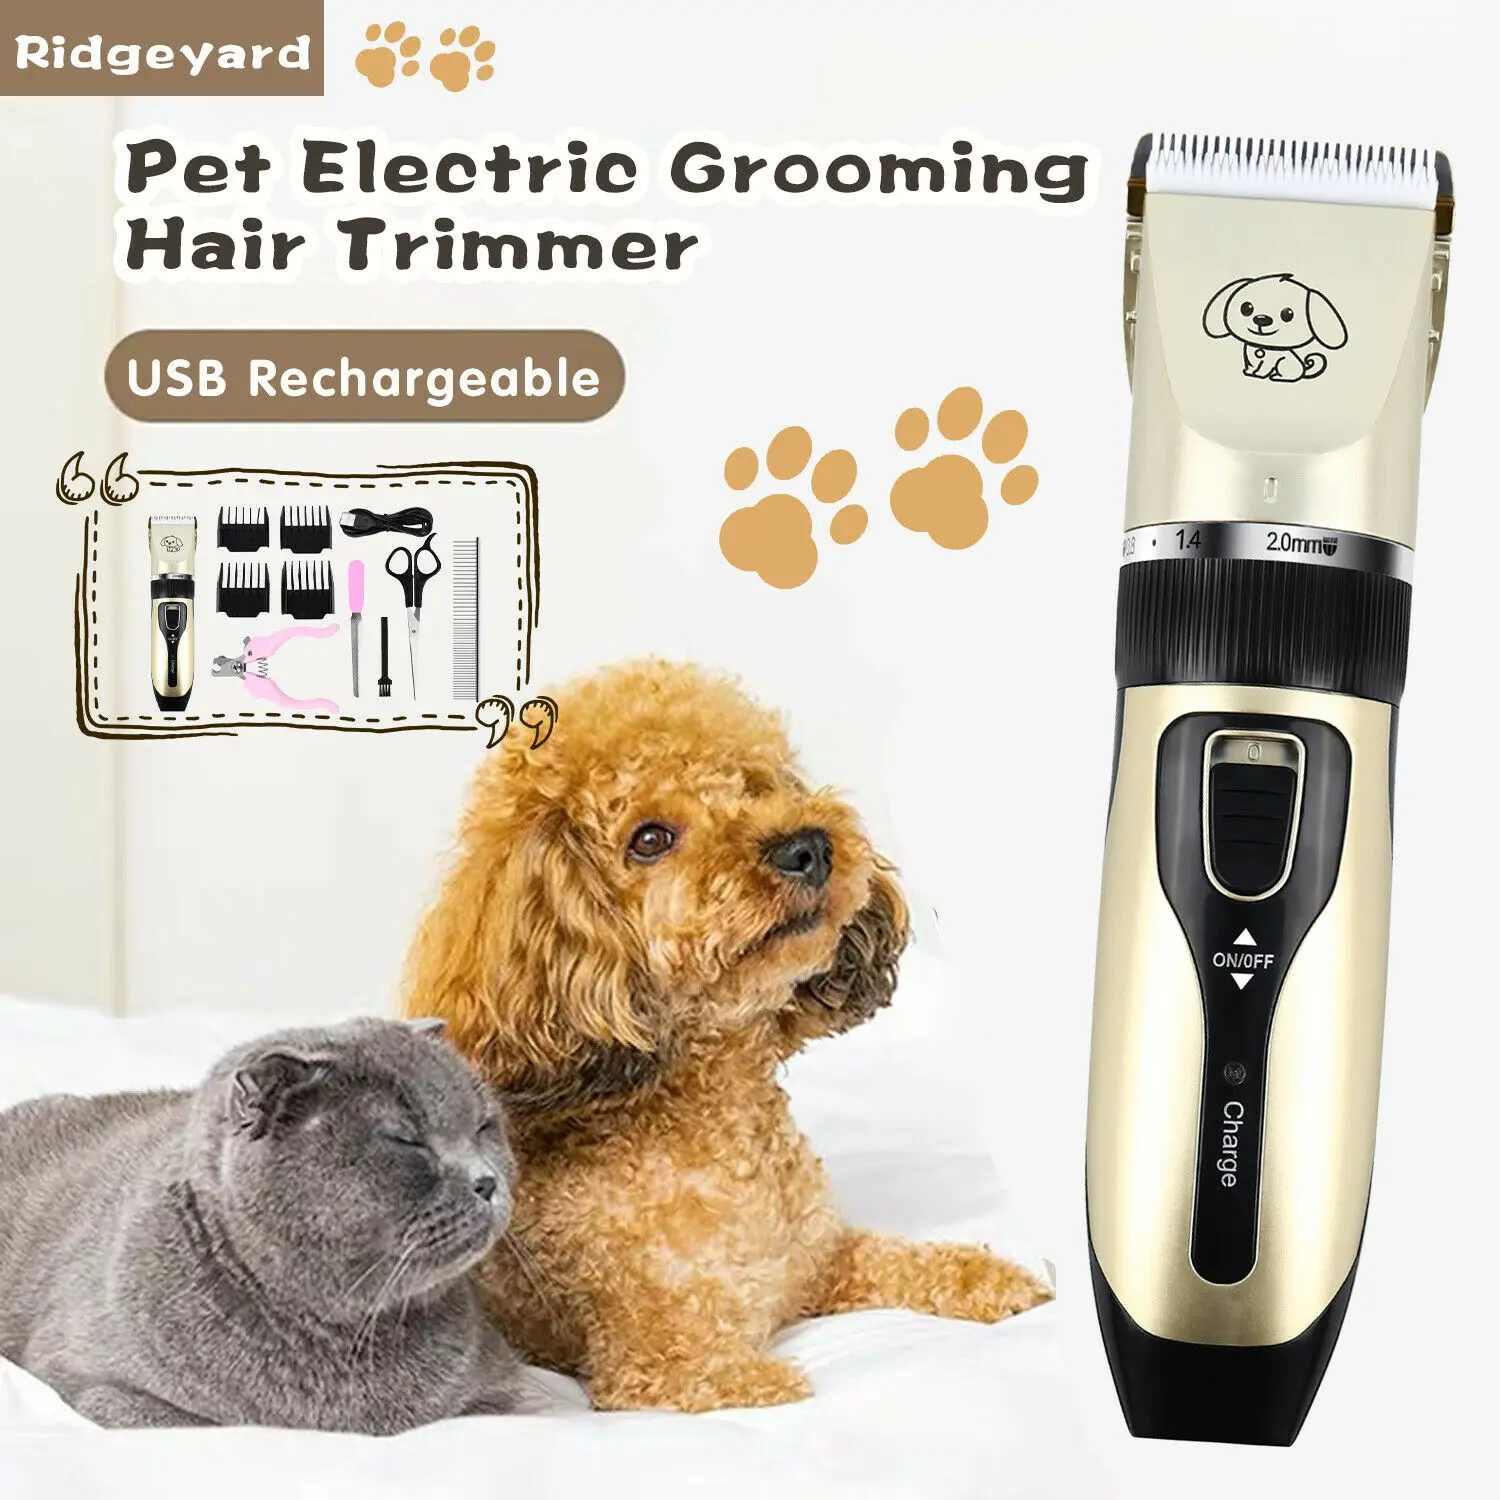 

Pet Dog Cat Grooming Clippers Hair Trimmer Groomer Shaver Razor Quiet Clipper